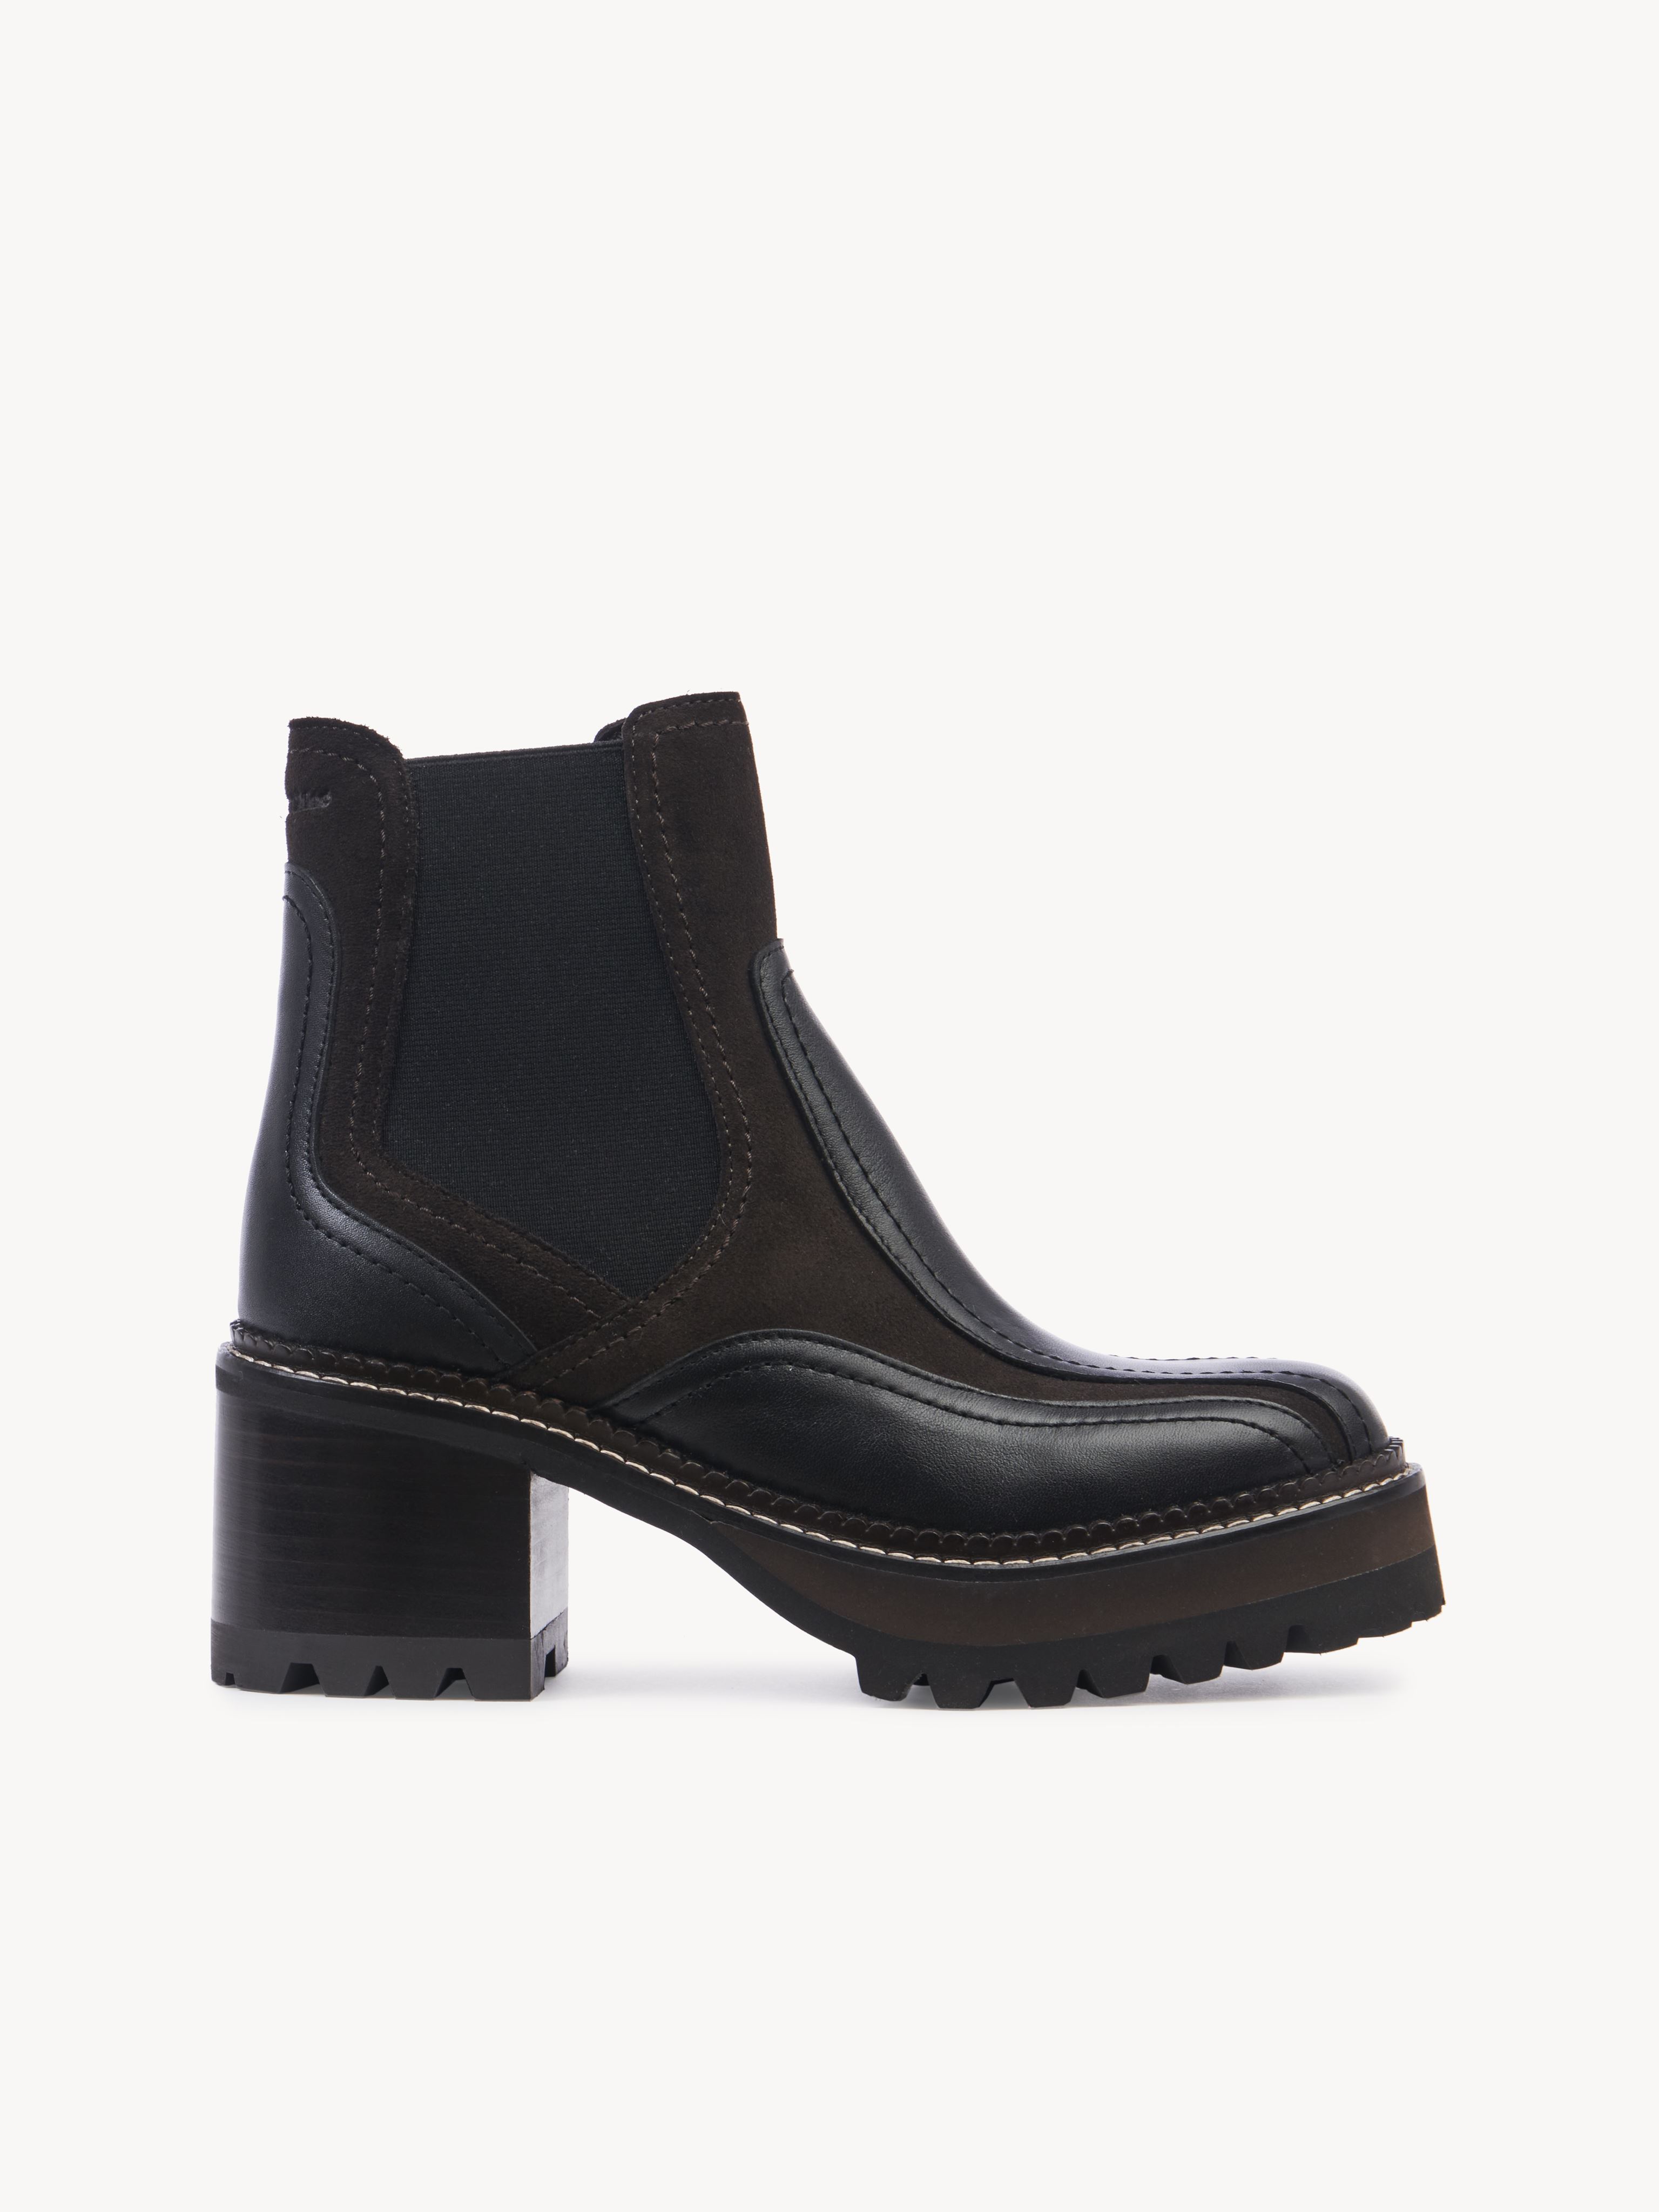 SEE BY CHLOÉ DAYNA CHELSEA BOOT BLACK SIZE 10 83% CALF-SKIN LEATHER, 17% SYNTHETIC FIBERS